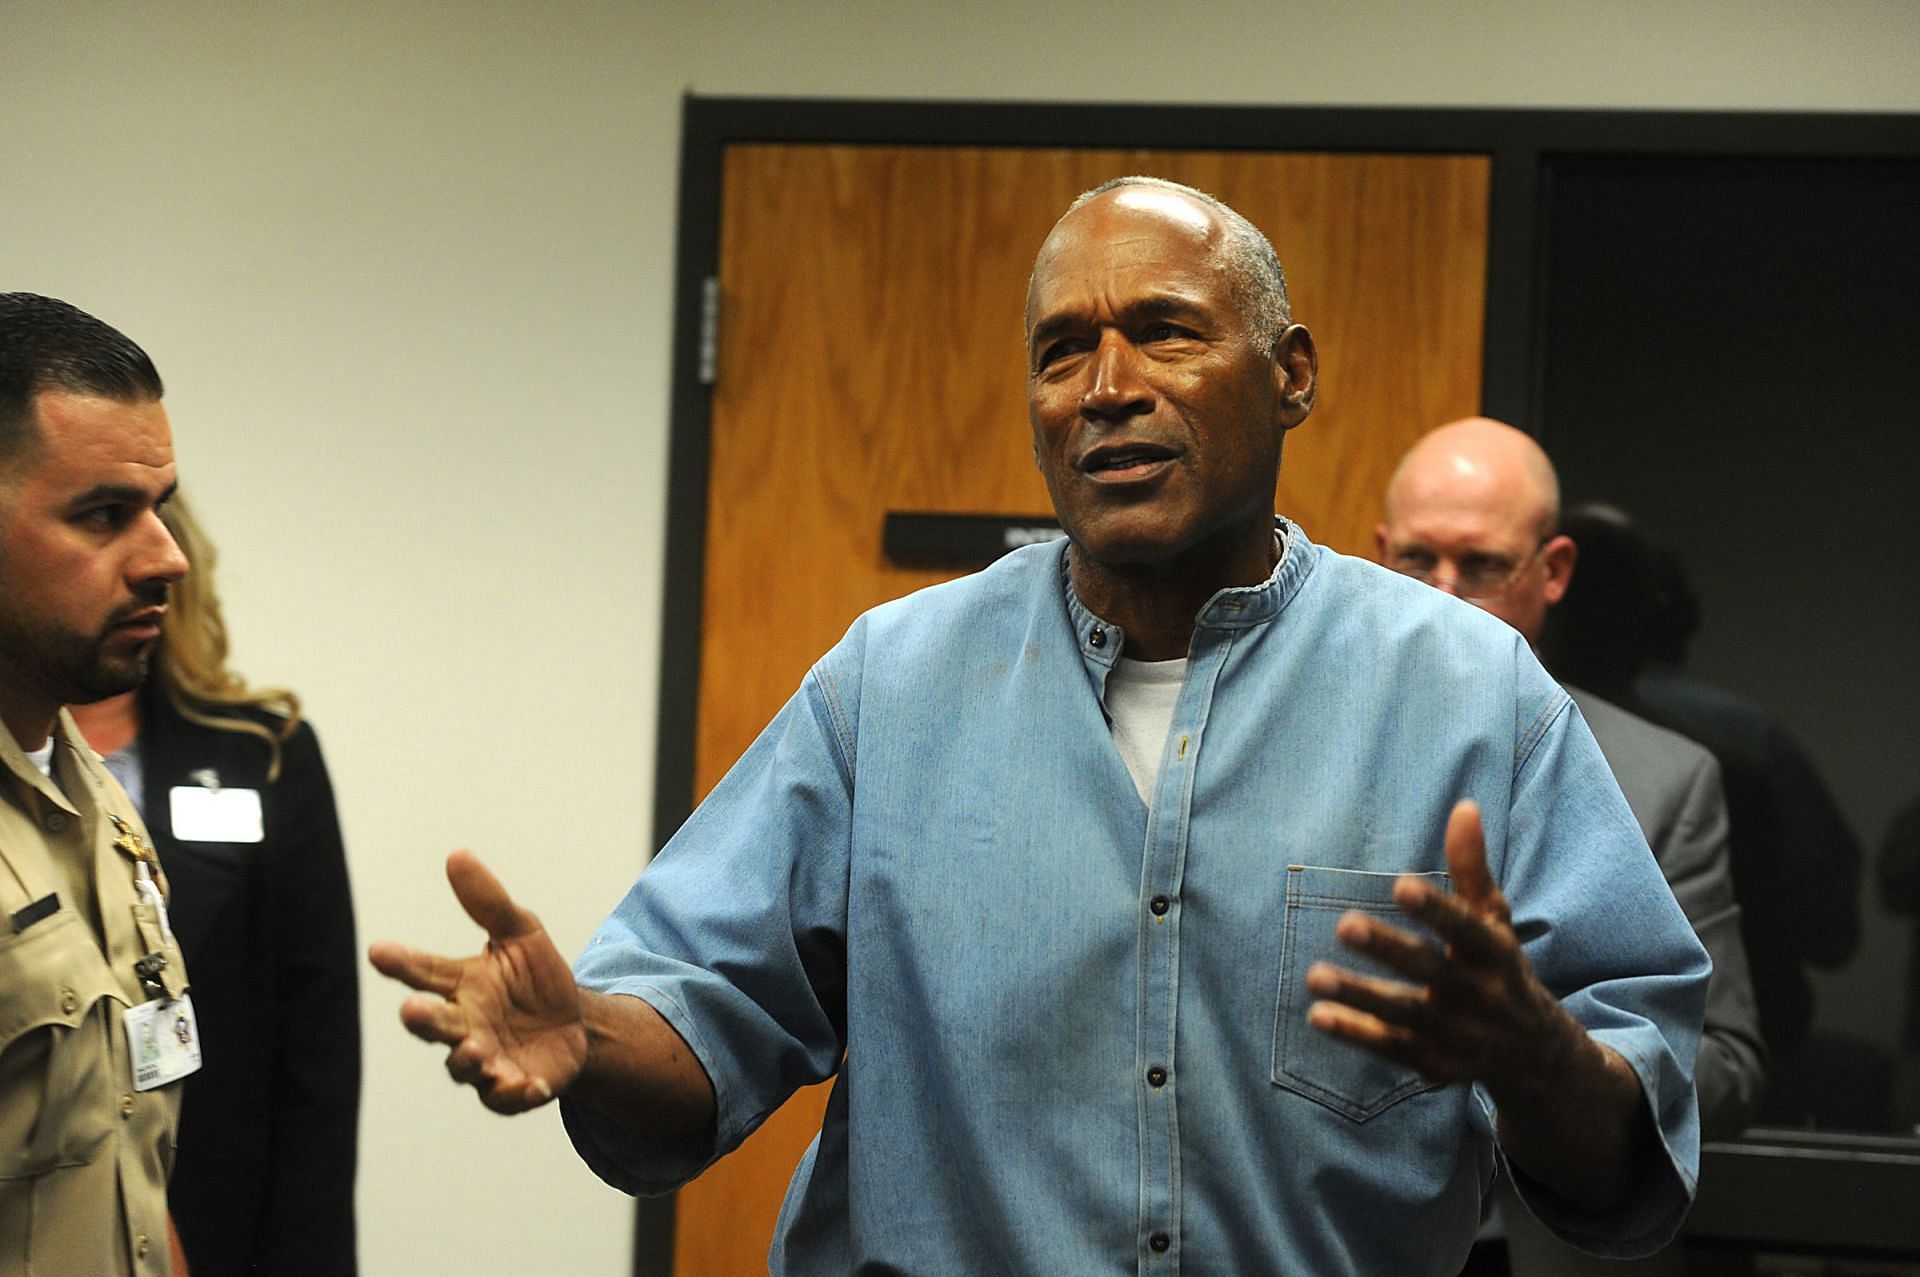 The Former Running Back Granted Parole At Hearing